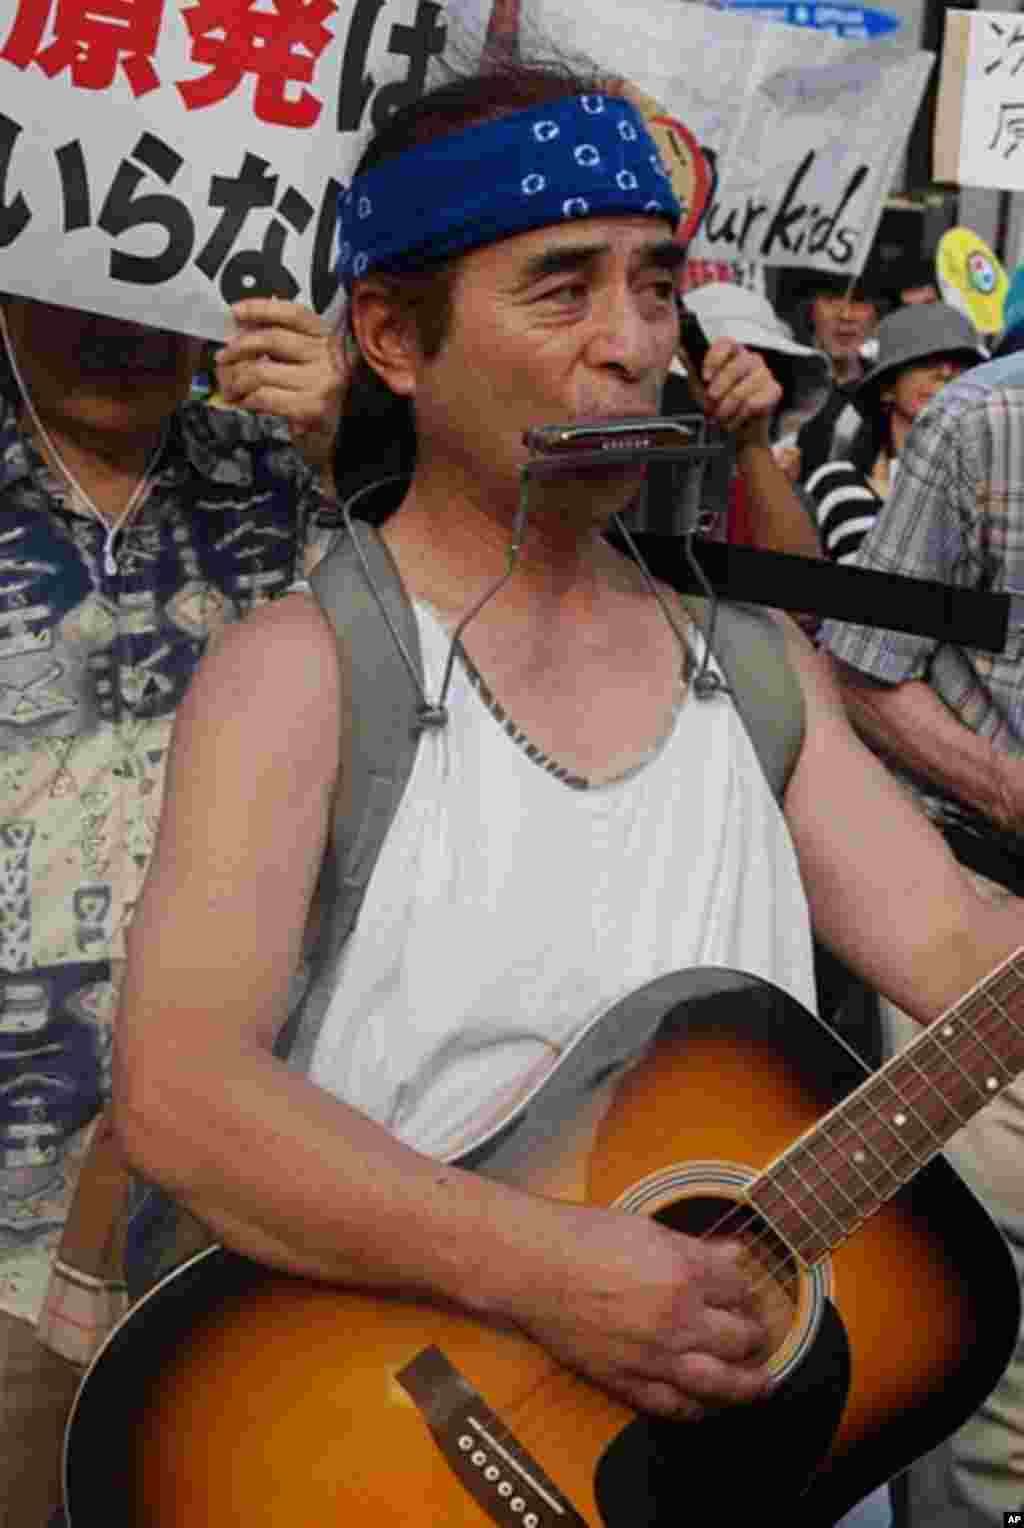 One musical participant in Monday's march through the streets of the Shibuya district in Tokyo.